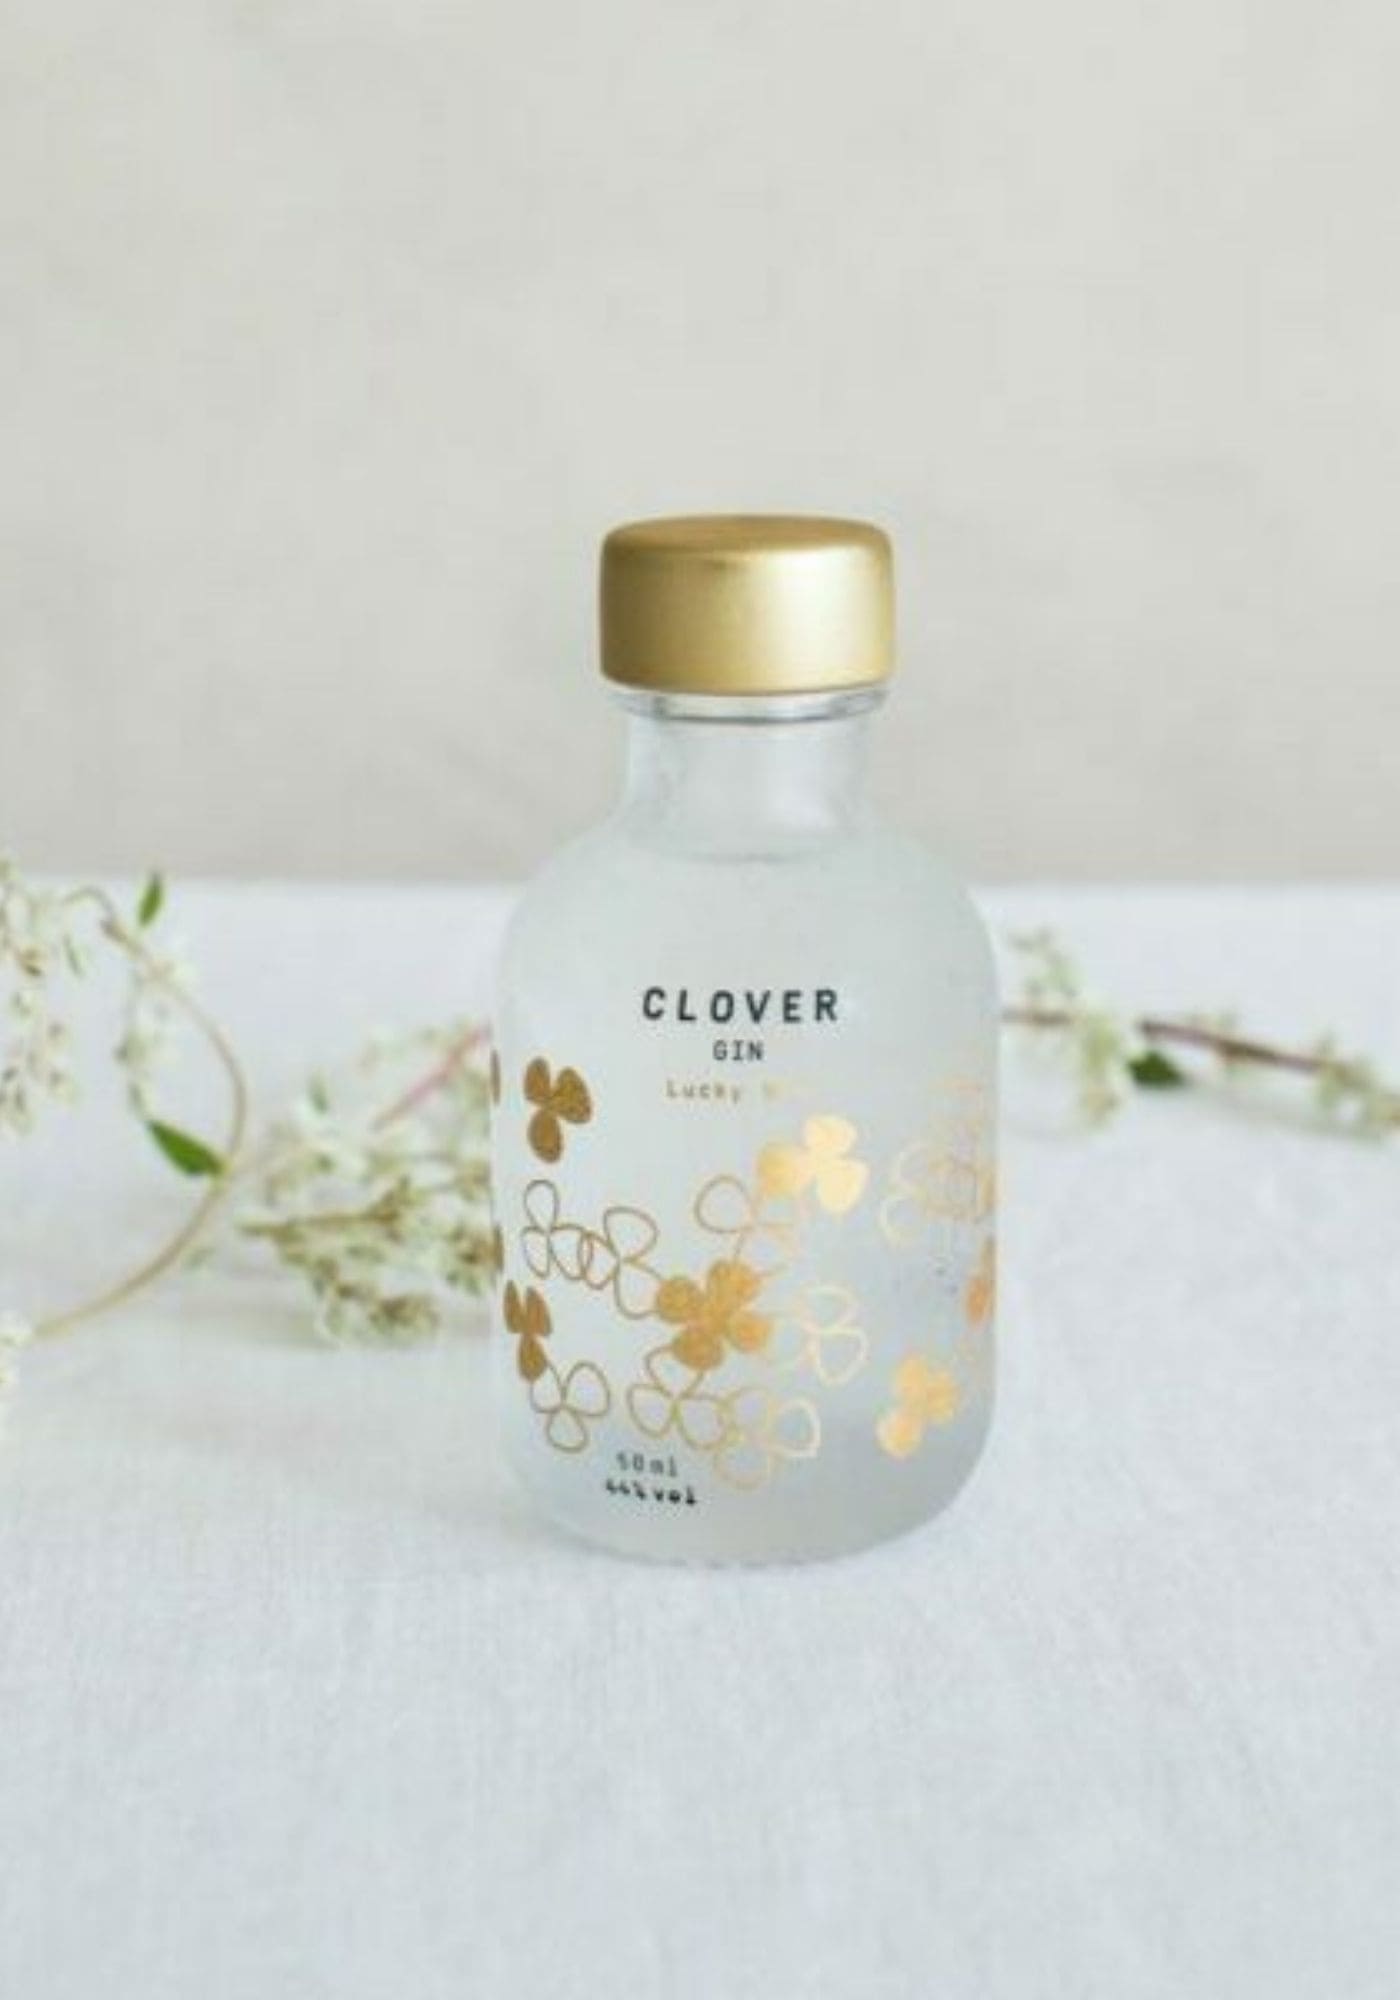 clover-gin-mini-bouteille-5-cl-agrumes-clementine-alcool